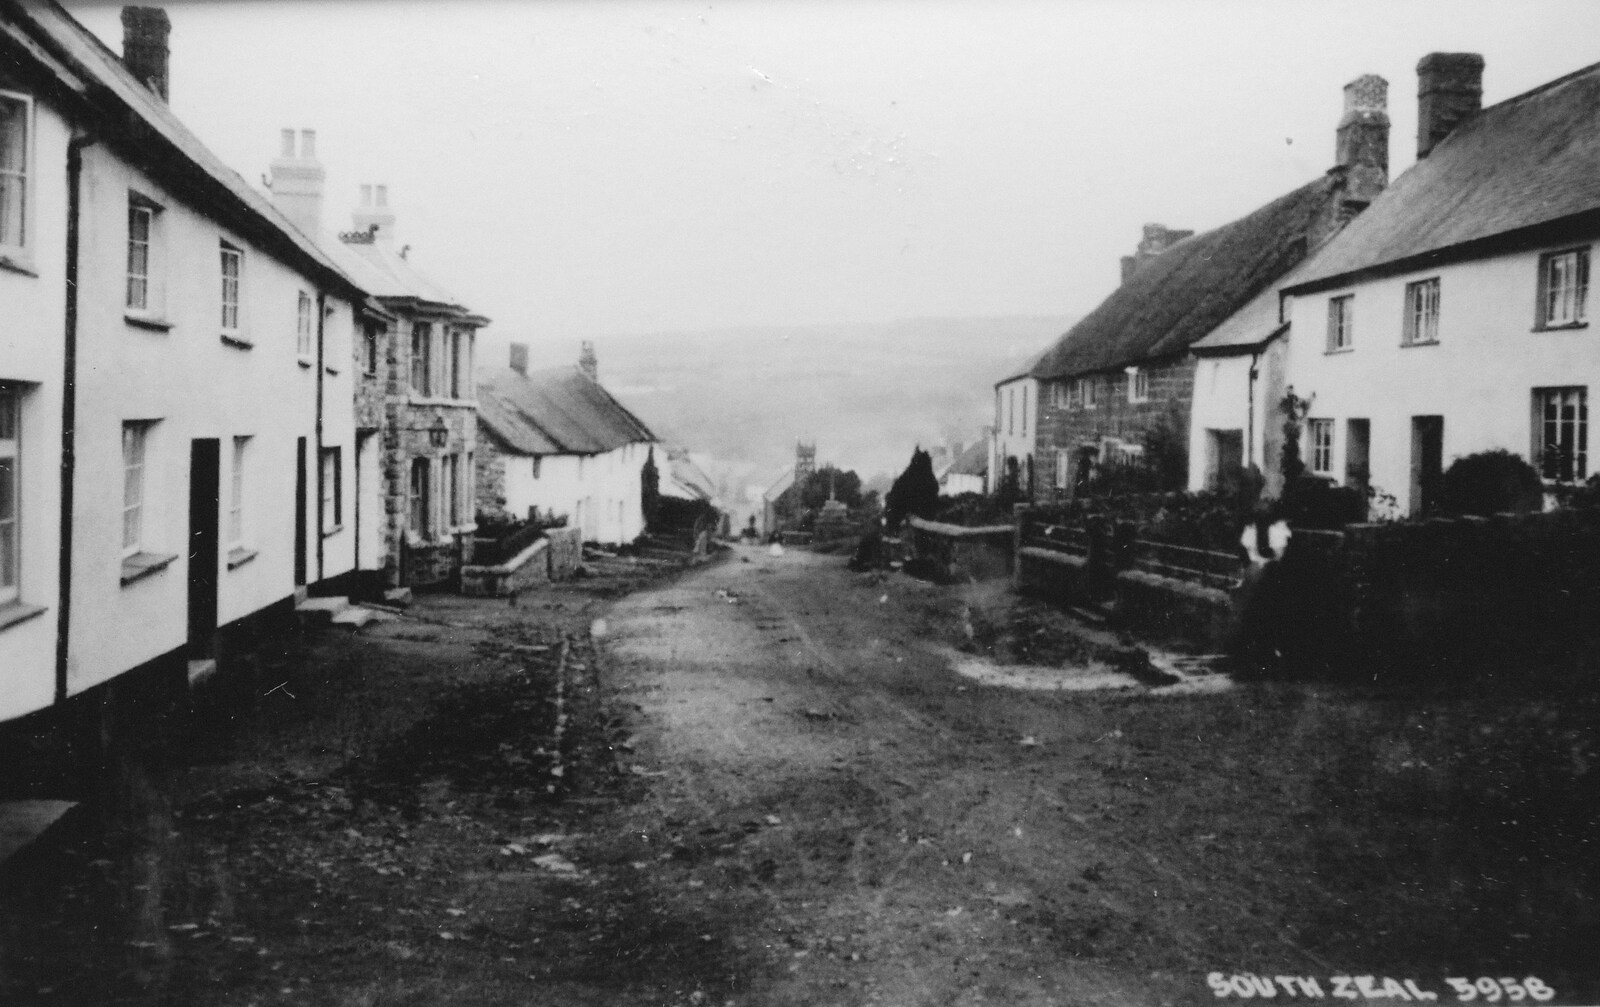 The cottage has photos of South Zeal in the 1800s from Easter in South Zeal and Moretonhampstead, Devon - 9th April